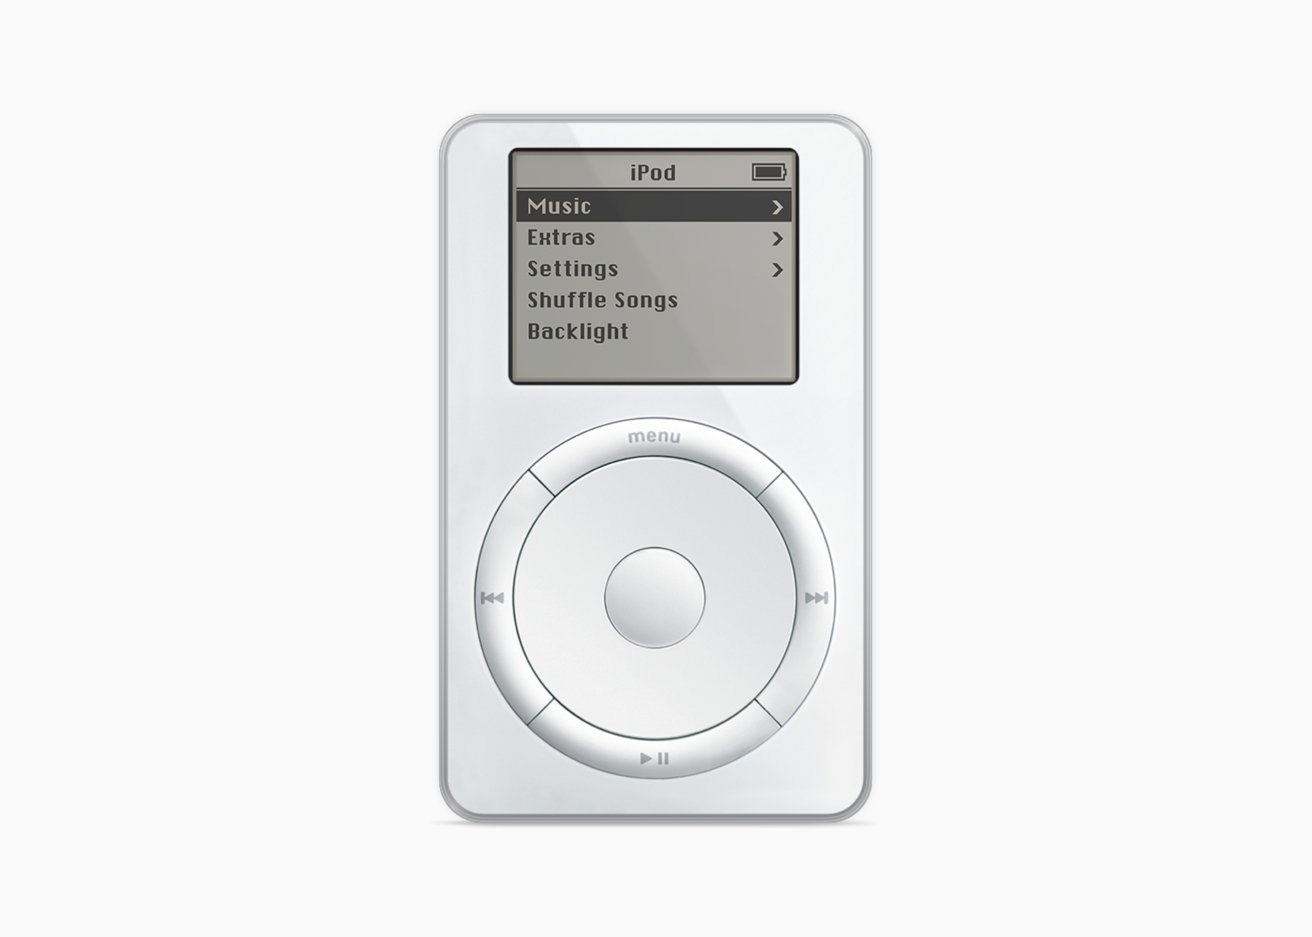 Apple has revamped the original iPod form factor under the 